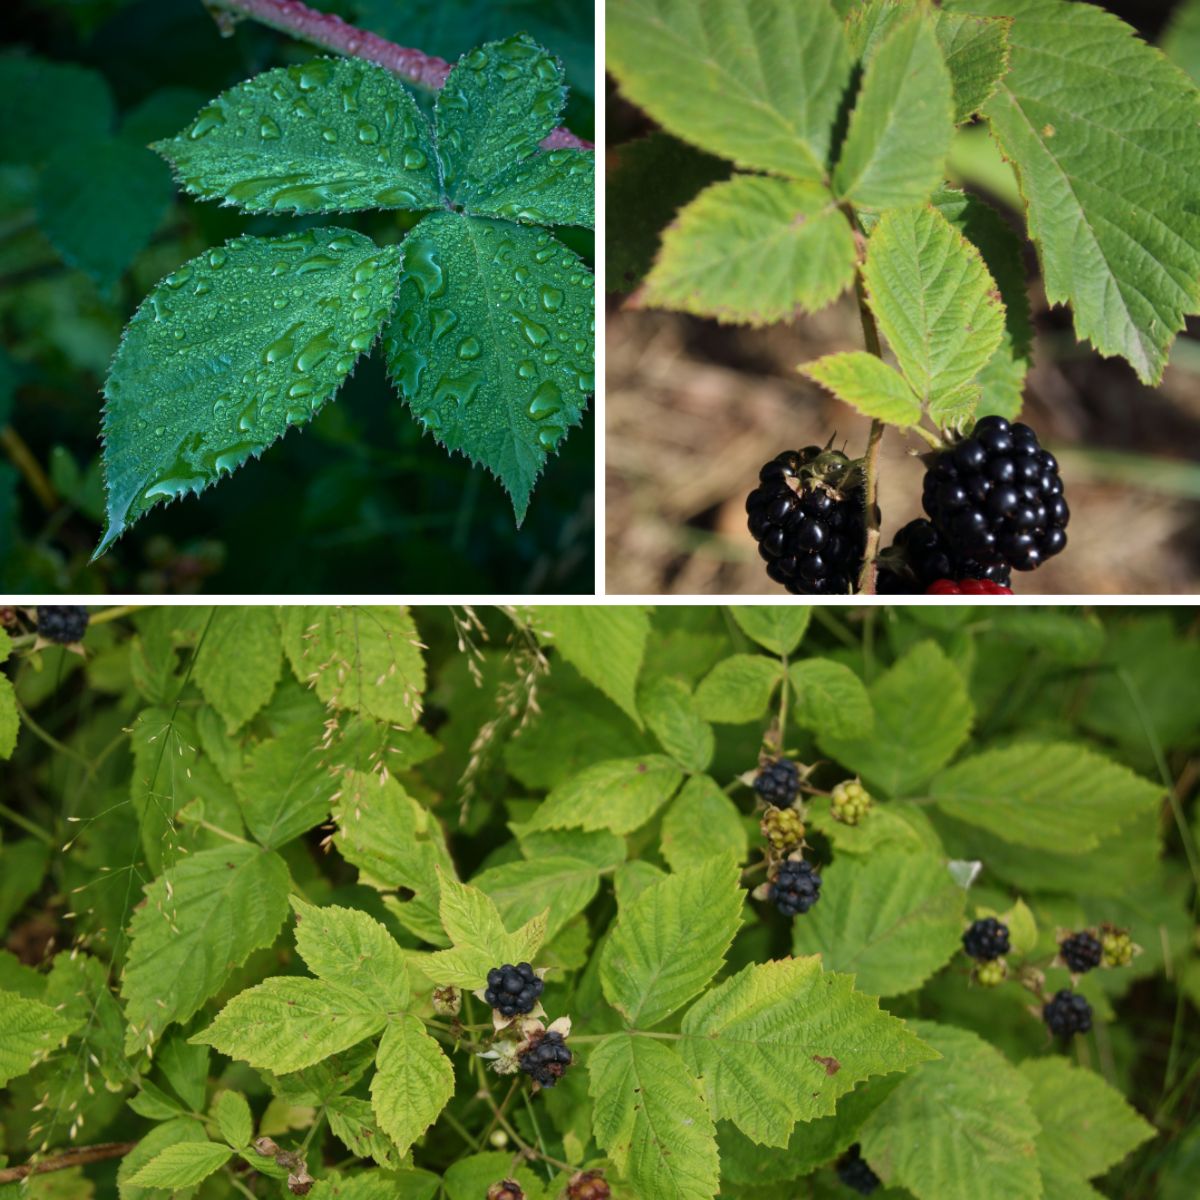 Three images of blackberry bushes, showing the leaf shape, fruits and some mixed flower and fruit, to show the different aspects in identification for children.